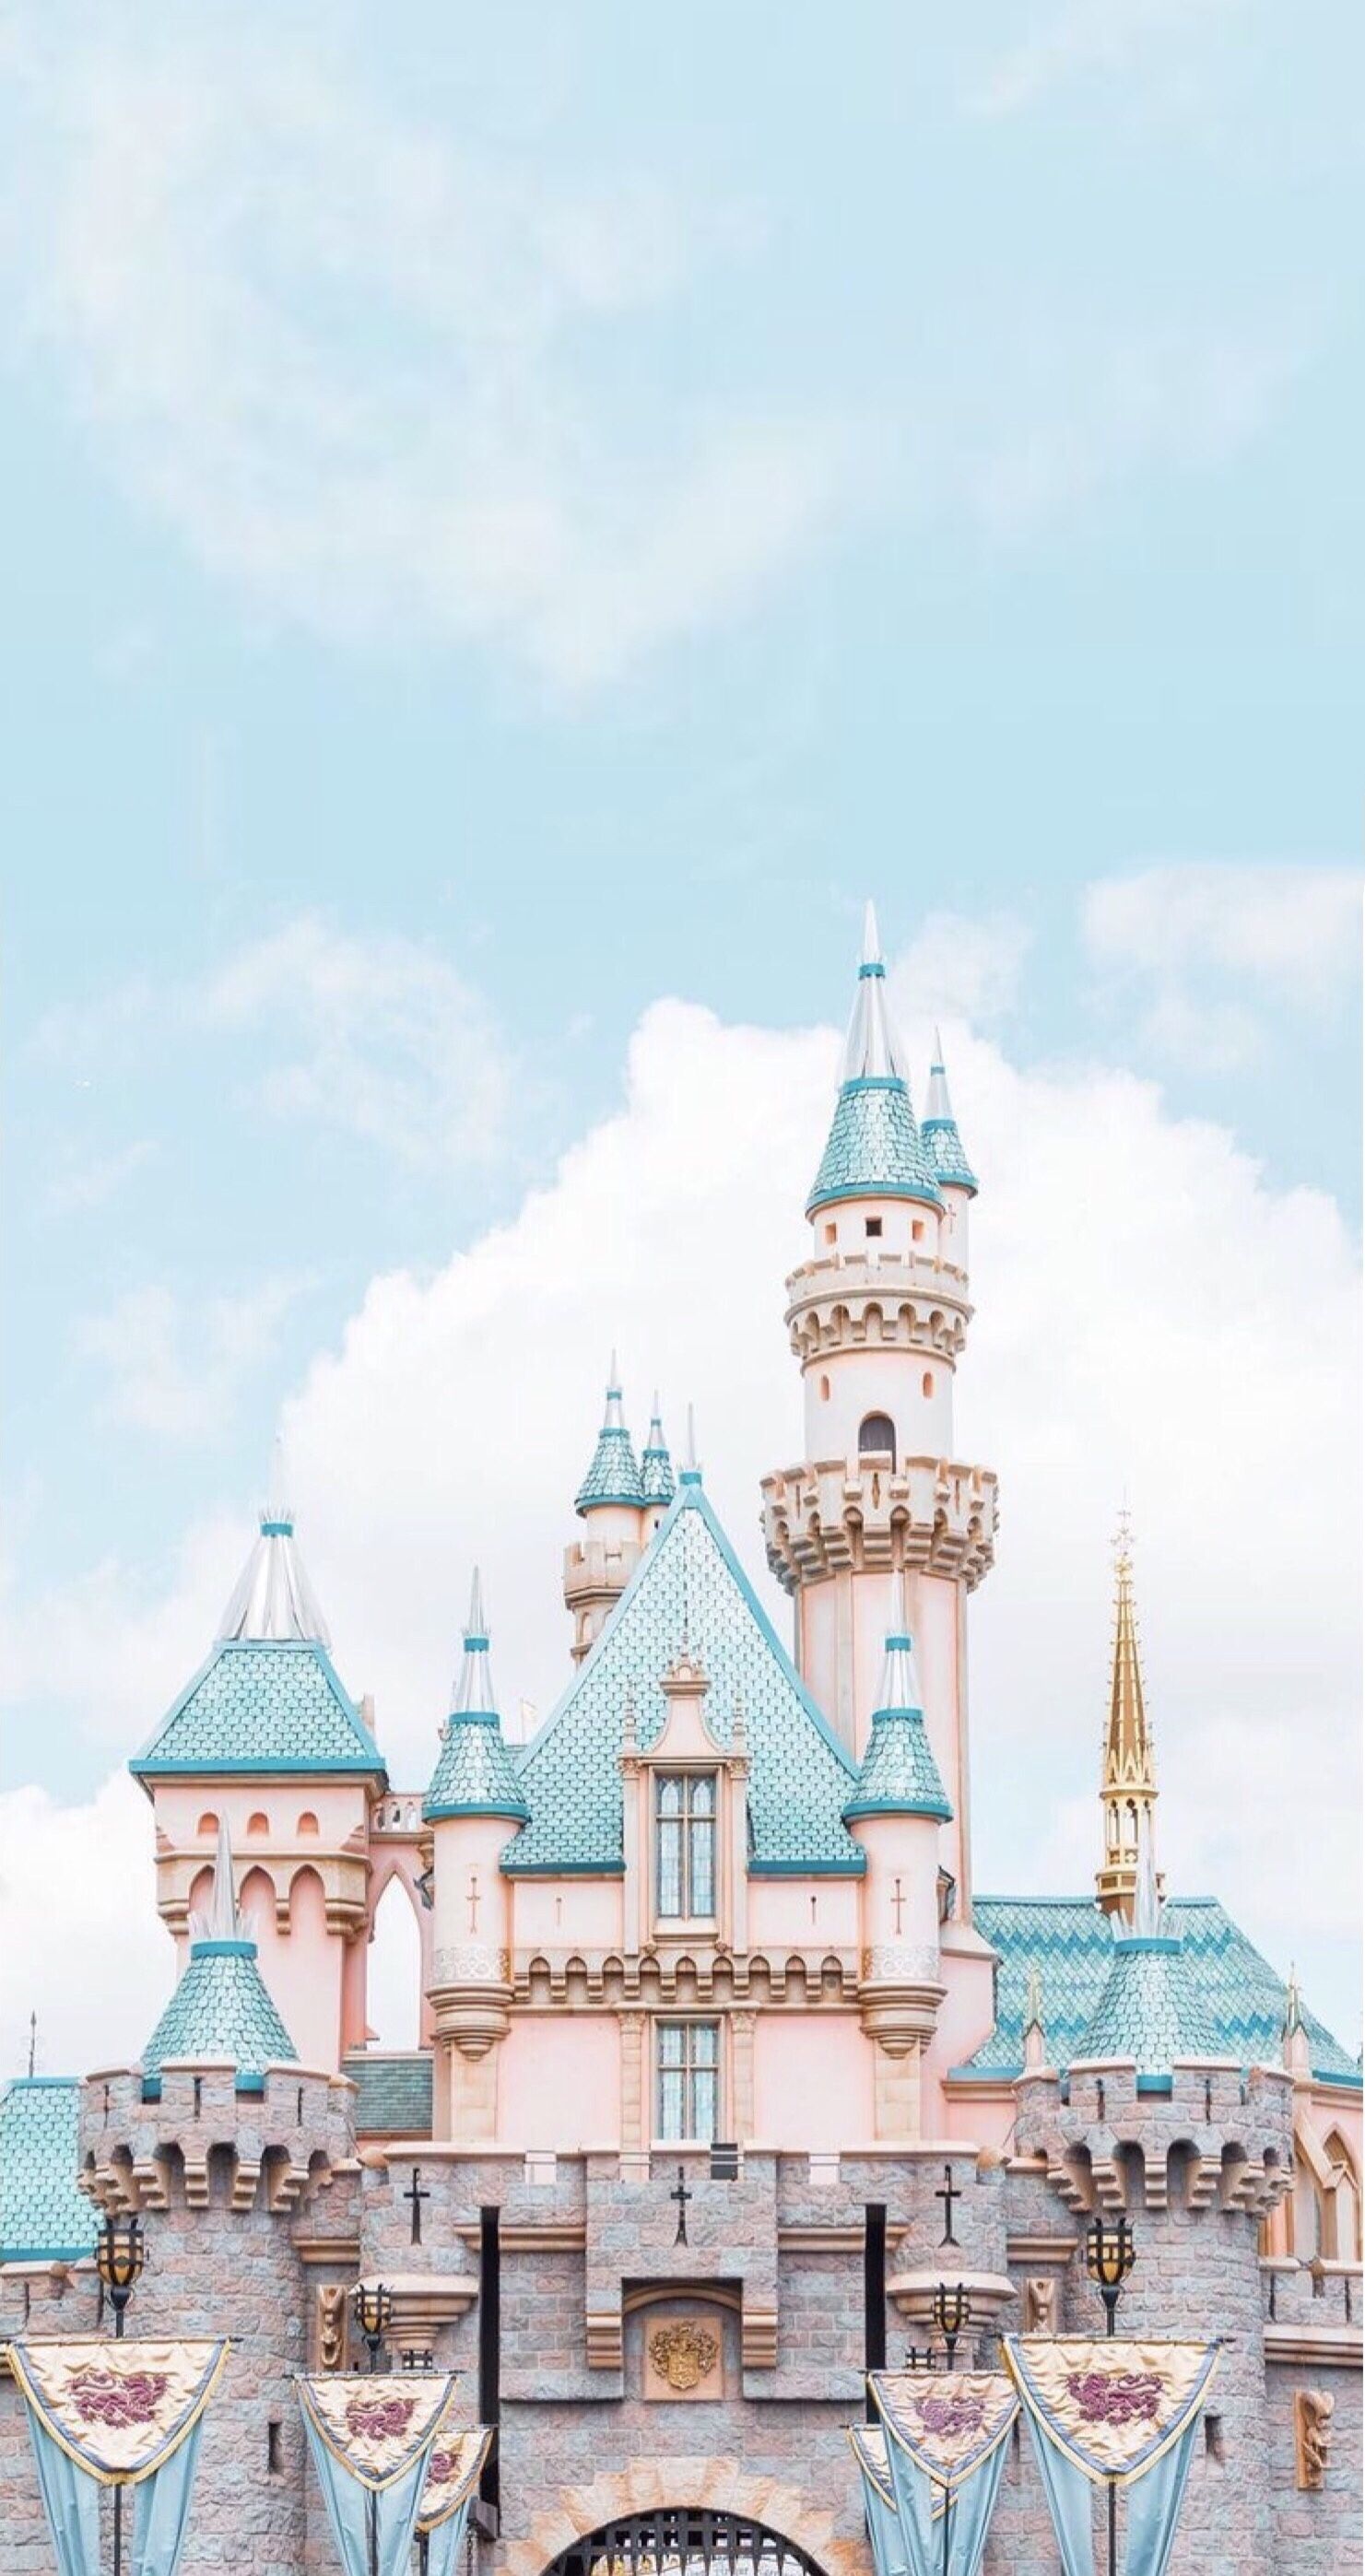 A pink castle with blue roofs and turrets. - Disneyland